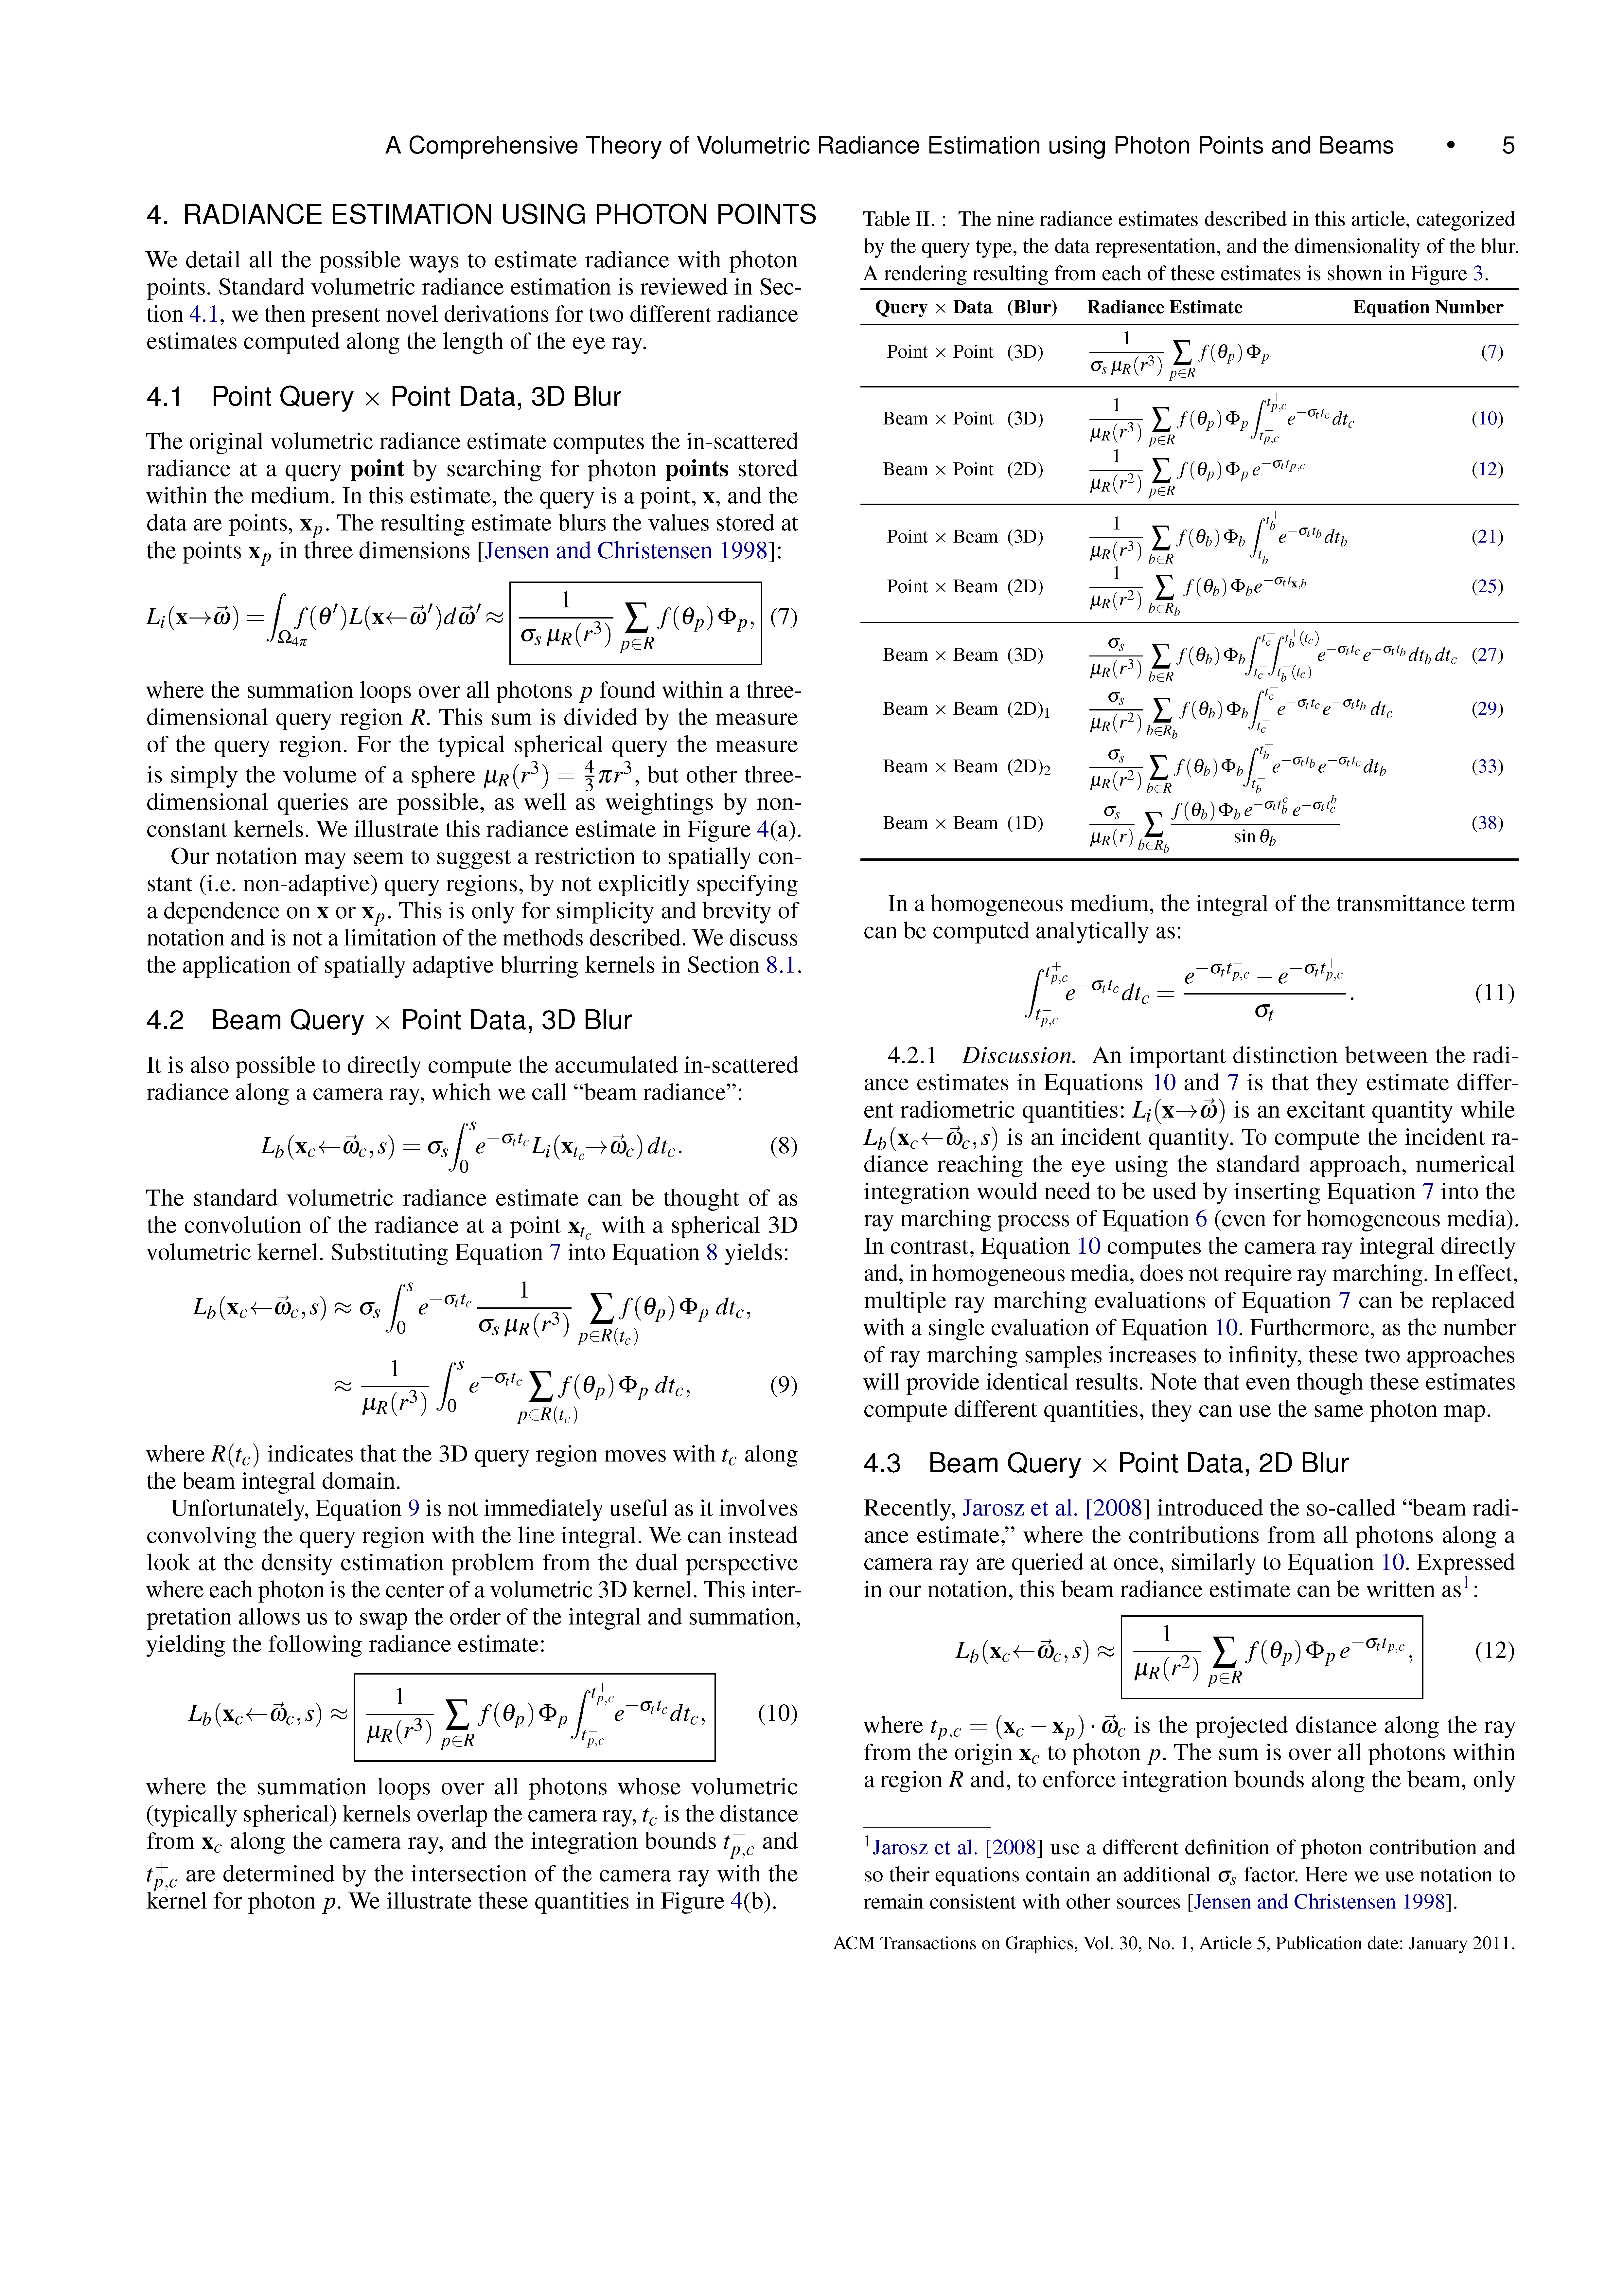 A Comprehensive Theory of Volumetric Radiance Estimation Using Photon Points and Beams Page 5